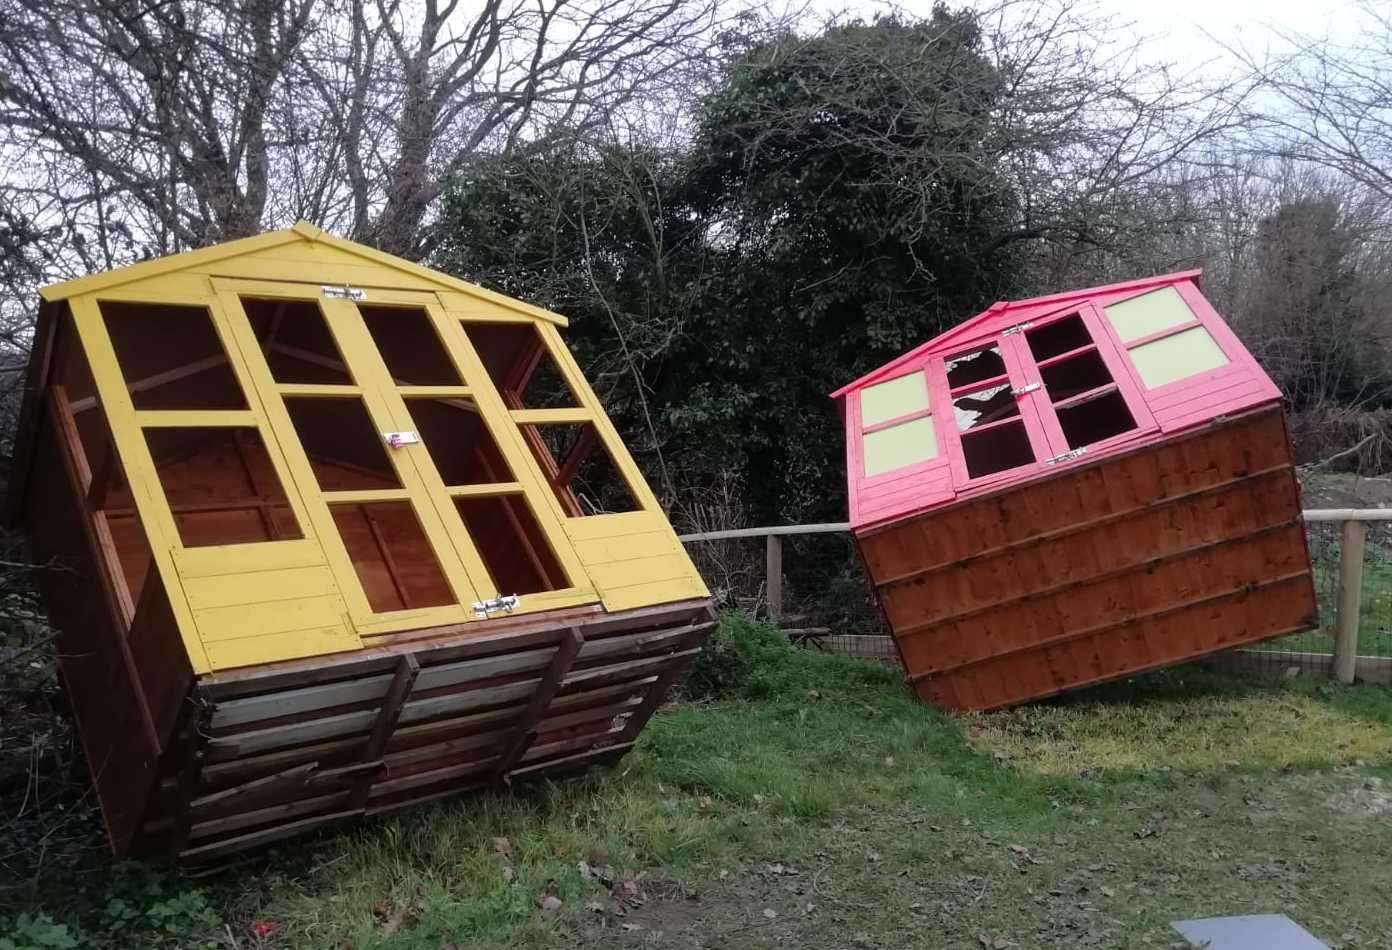 The wendy houses in the Great Outdoors play area in Swanley Park have been vandalised